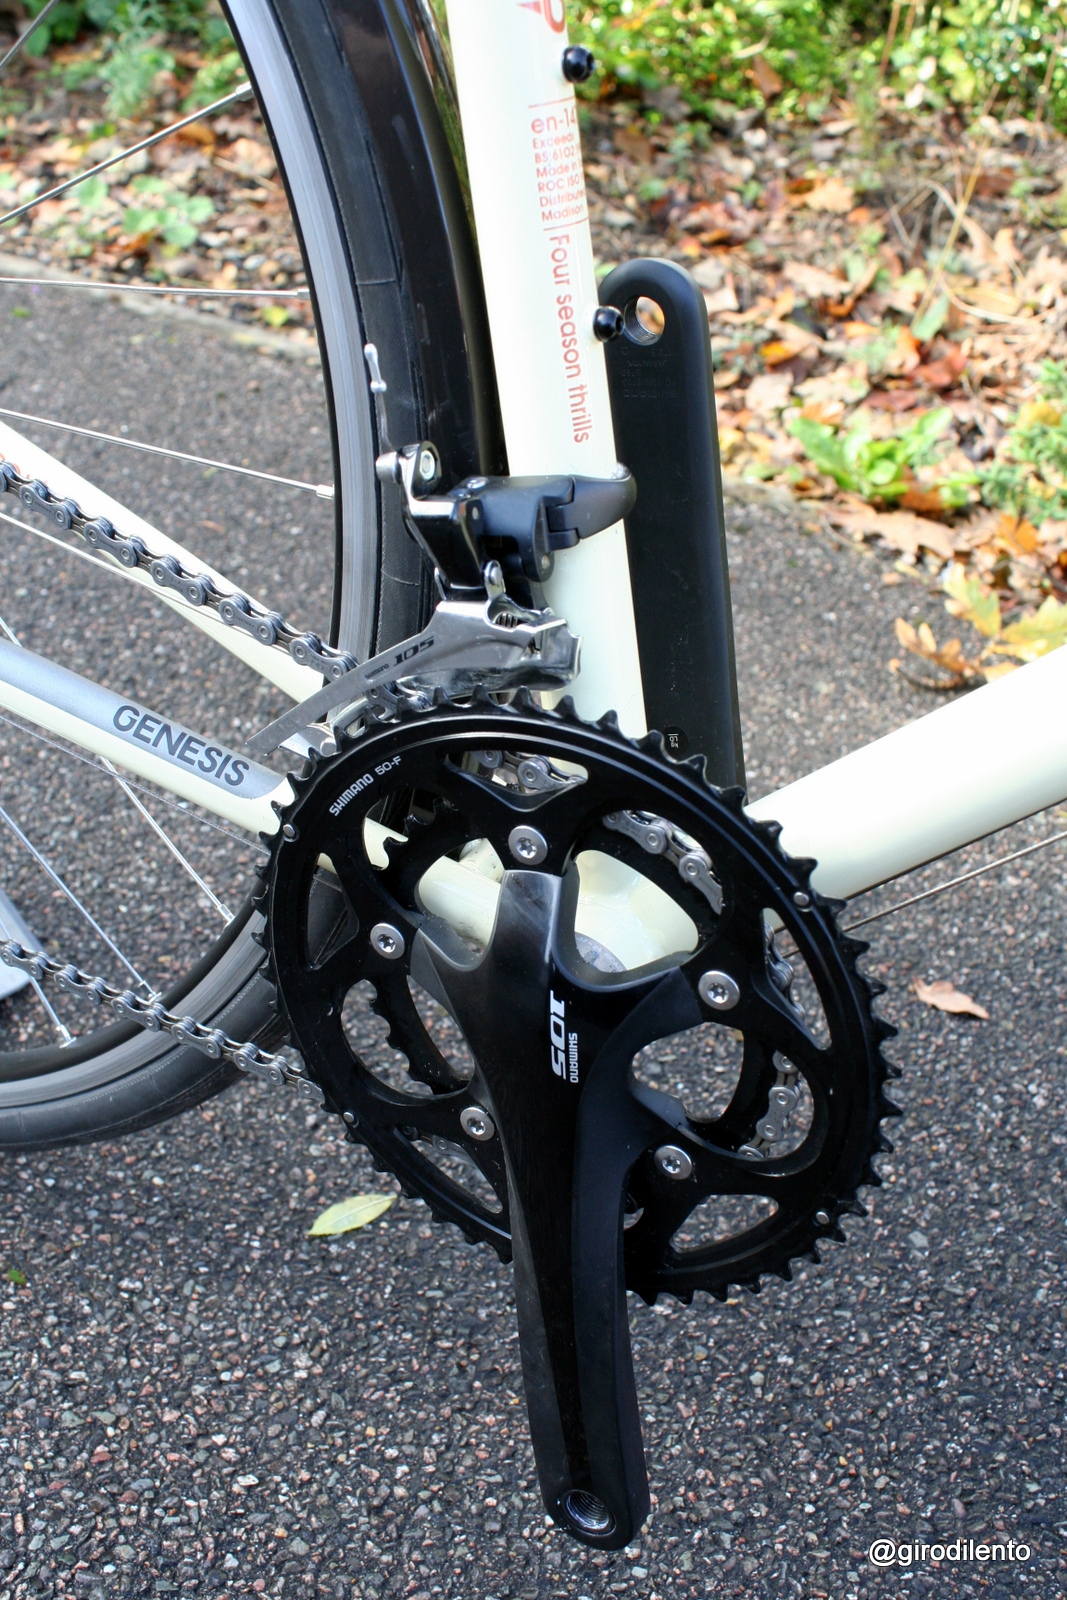 Shimano 105 in black goes very well with the colours of the bike